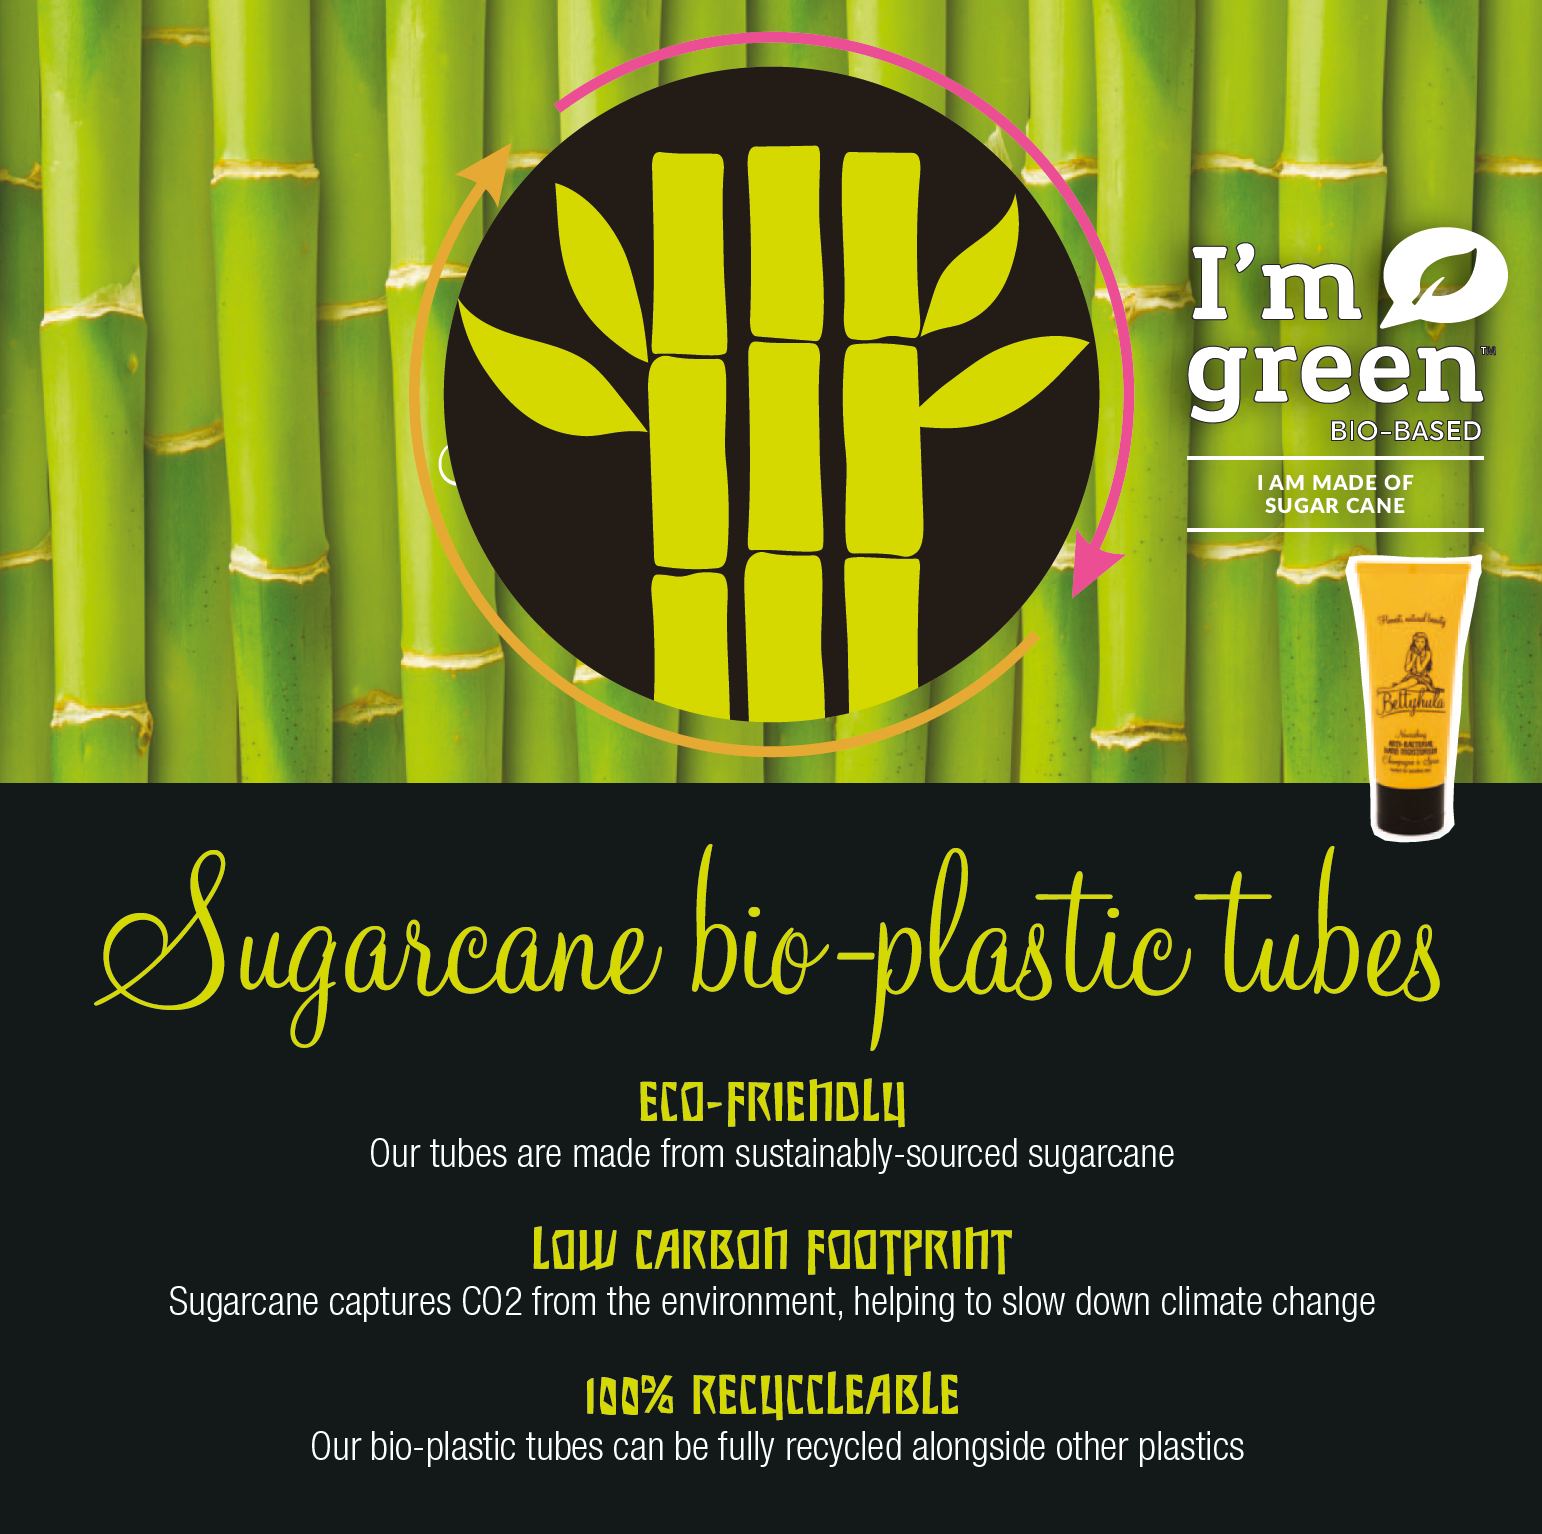 BETTYHULA LAUNCHES ECO FRIENDLY BIO-PLASTIC TUBES MADE FROM SUGARCANE.